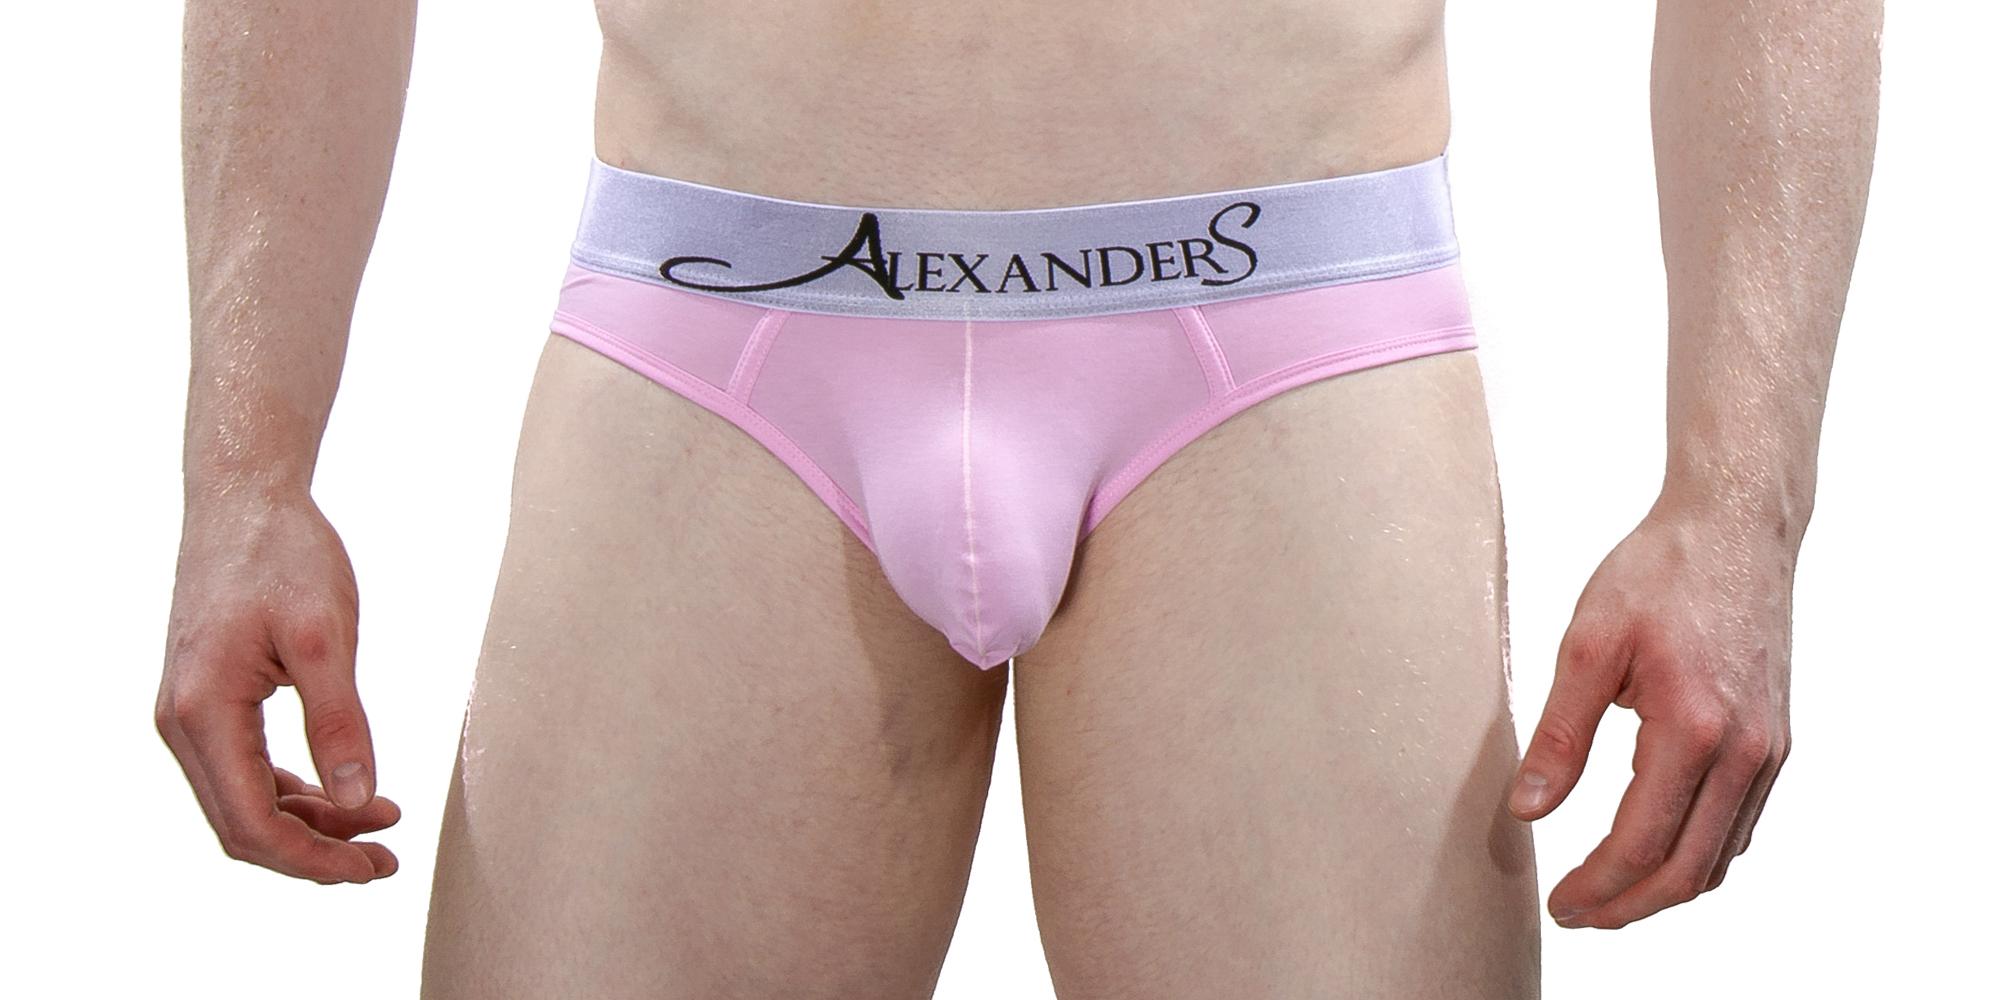 Shop men's underwear at AlexanderS for multipacks, hipsters, classic briefs, and more. Find the best coverage, colours, and styles all in one package.